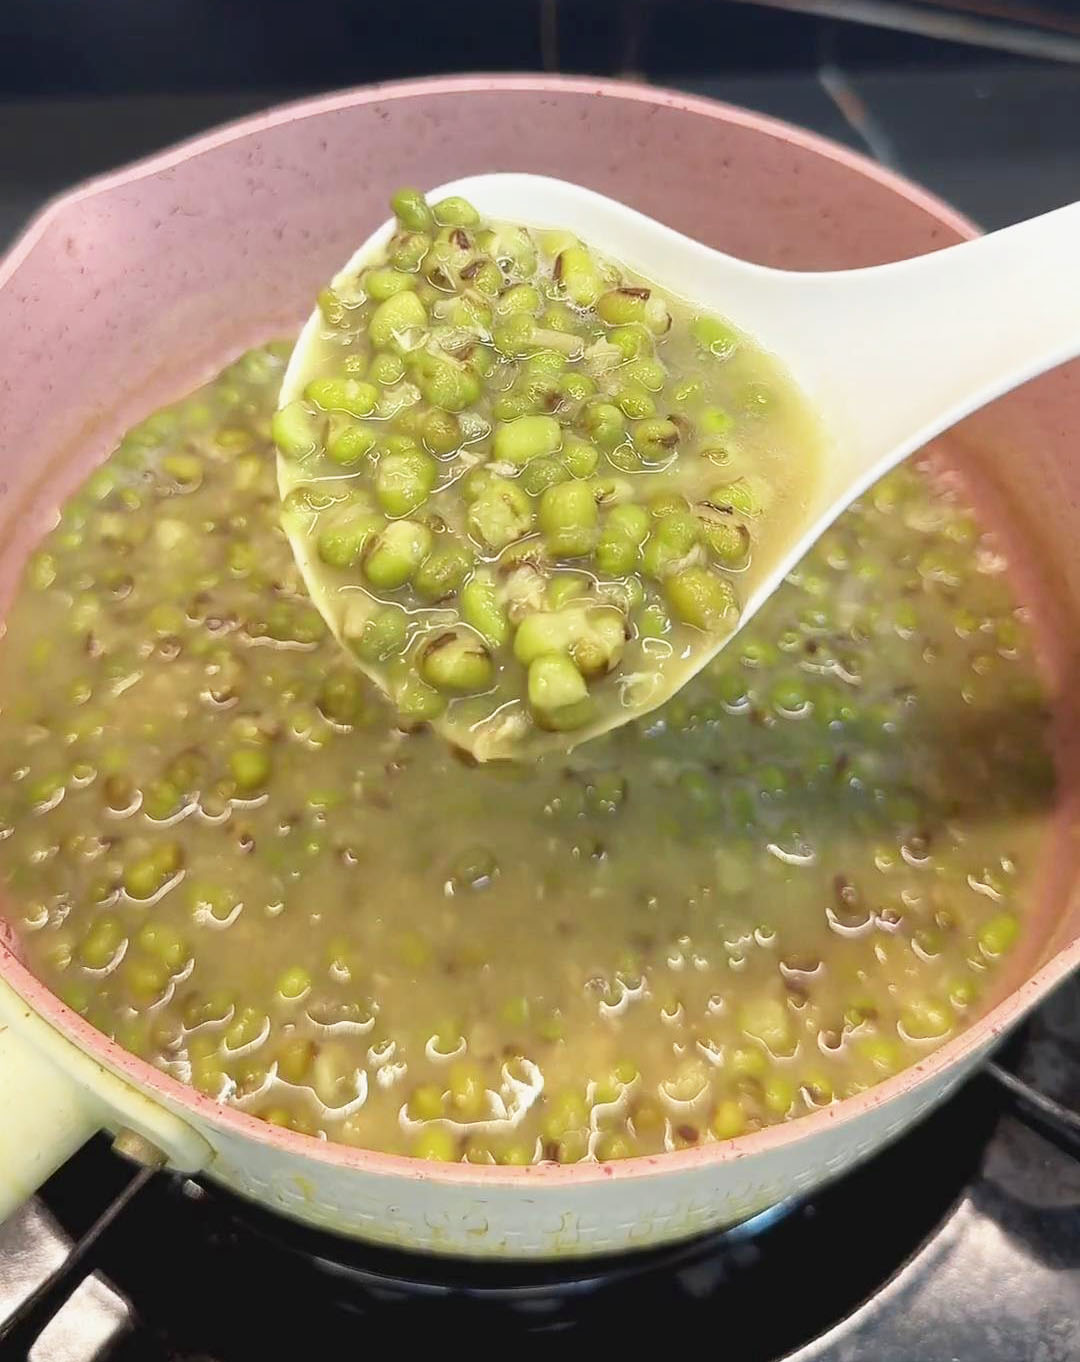 mung beans become tender and bloated